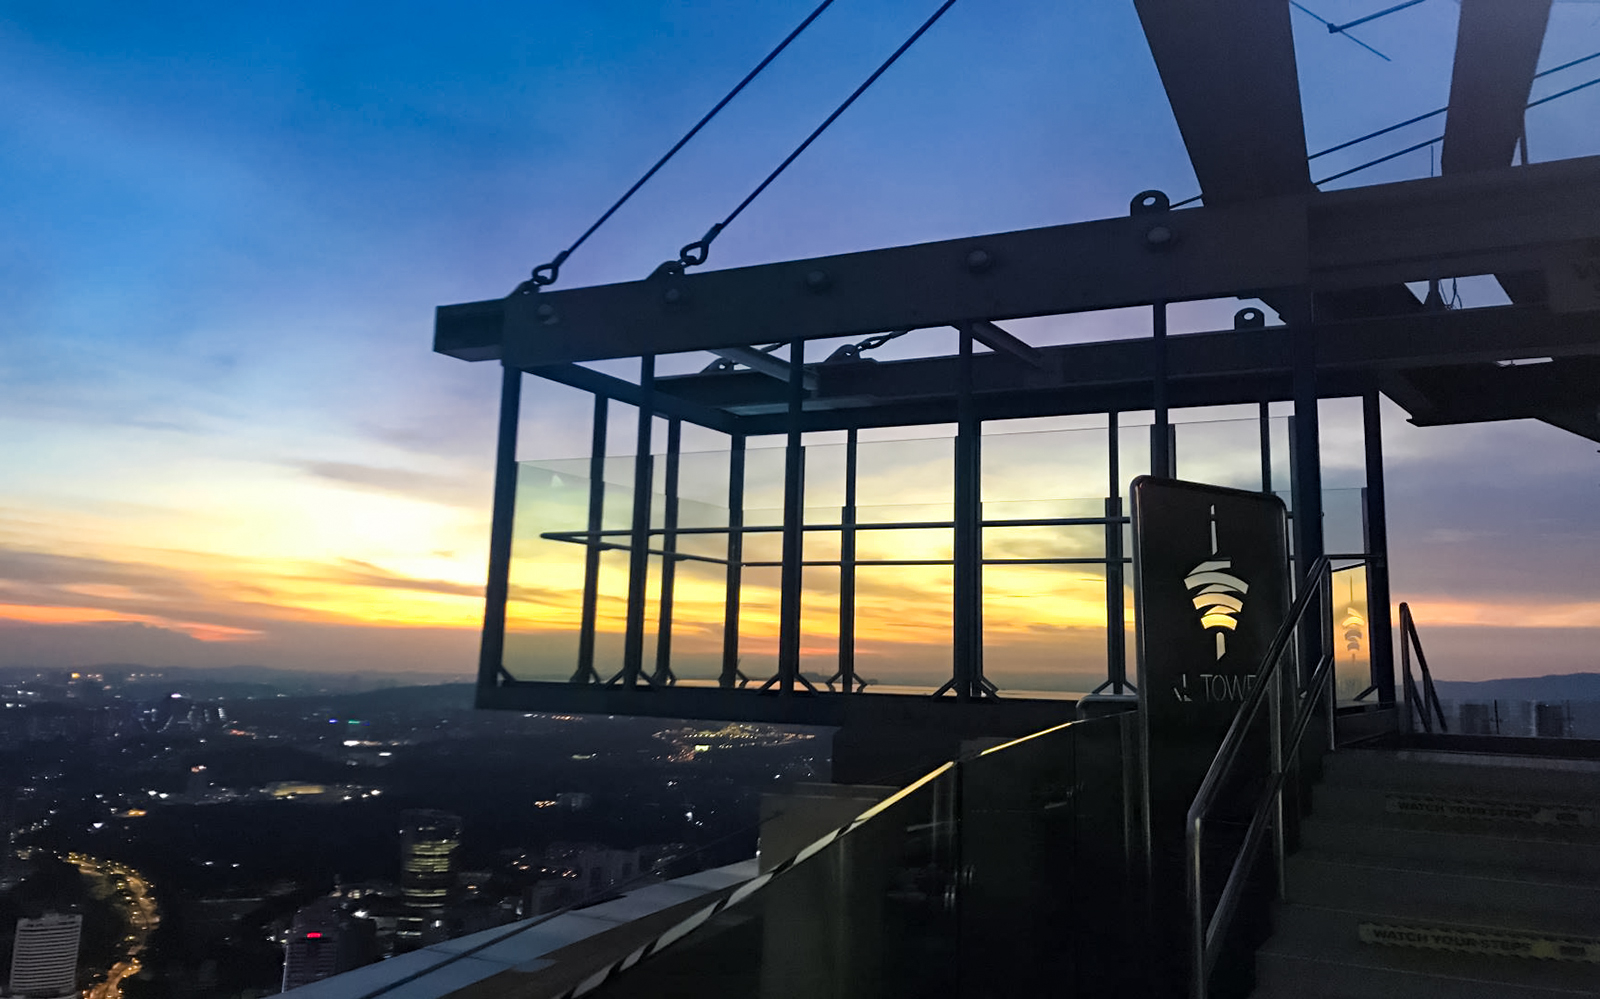 Reaching new heights: Explore the KL Tower Observation Deck in Malaysia